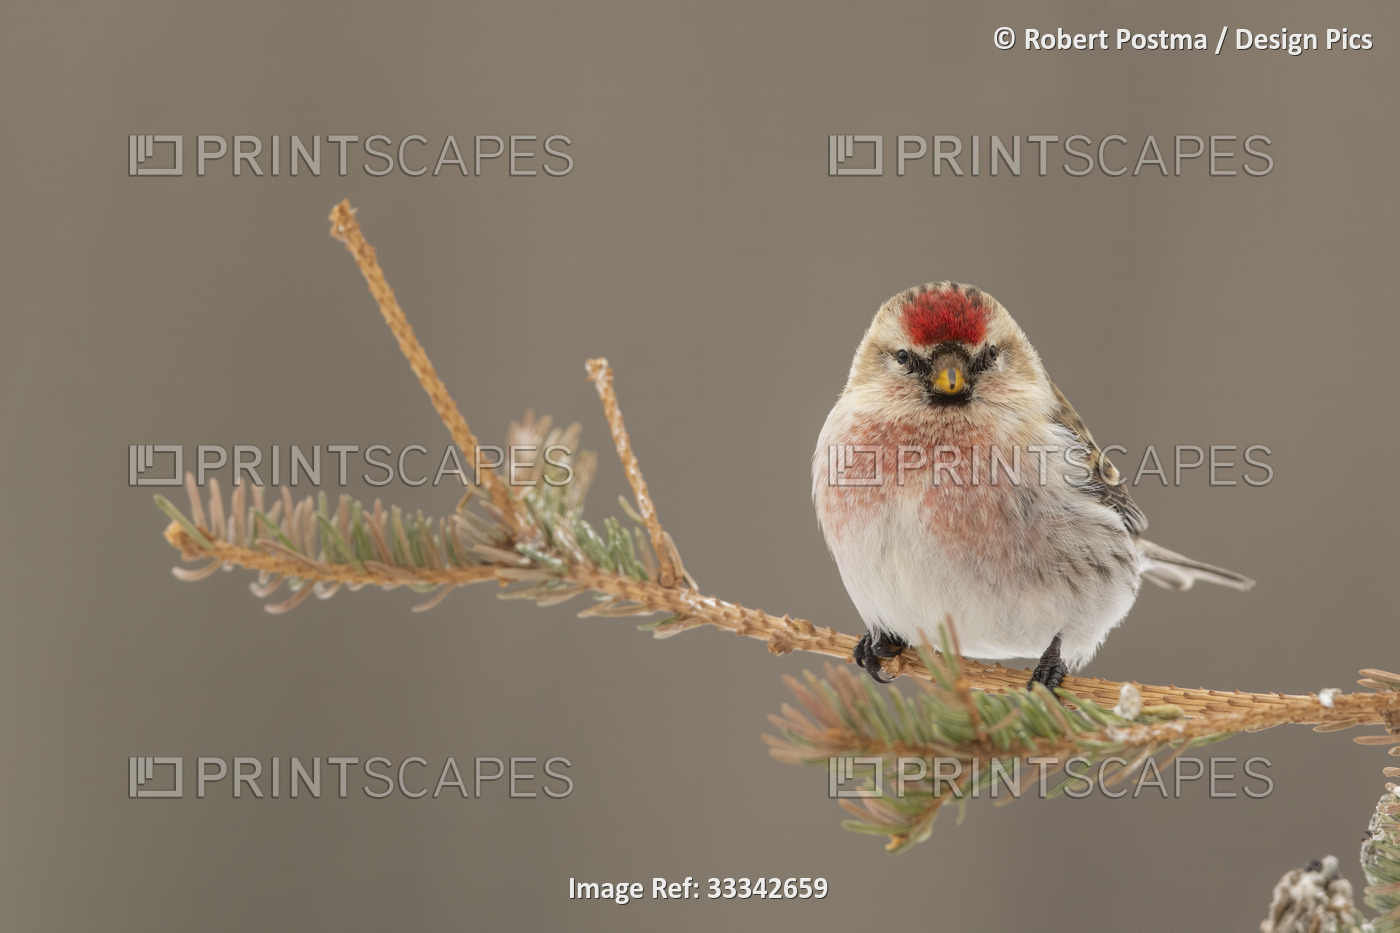 A beautiful bird with red and white colouring sits on a branch looking at the ...